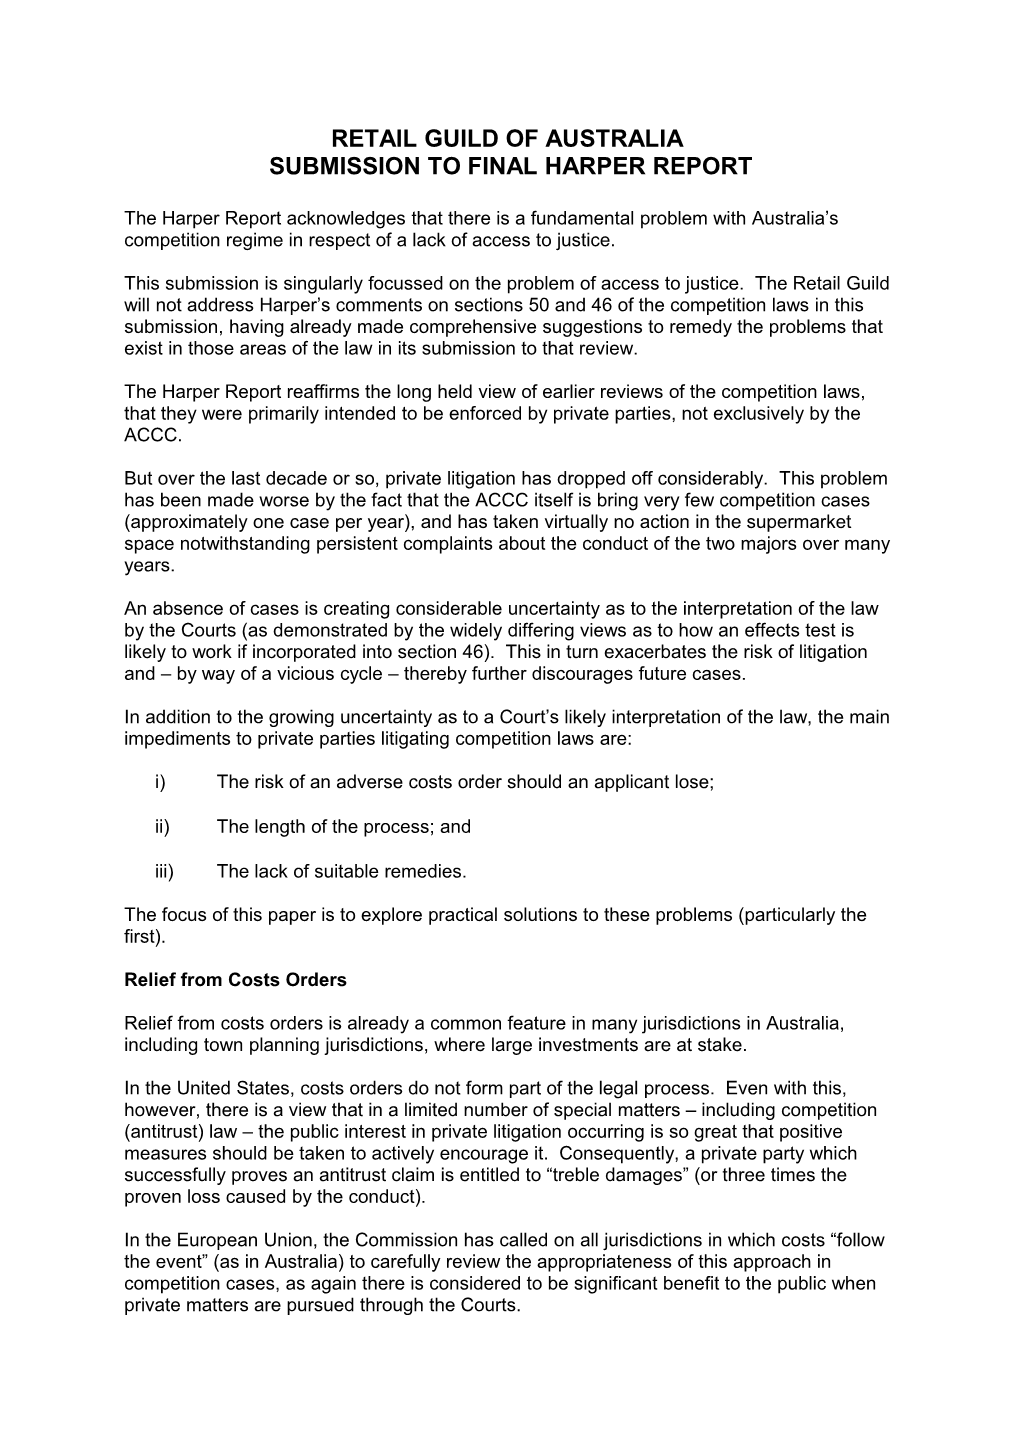 Retail Guild of Australia - Competition Policy Review Final Report